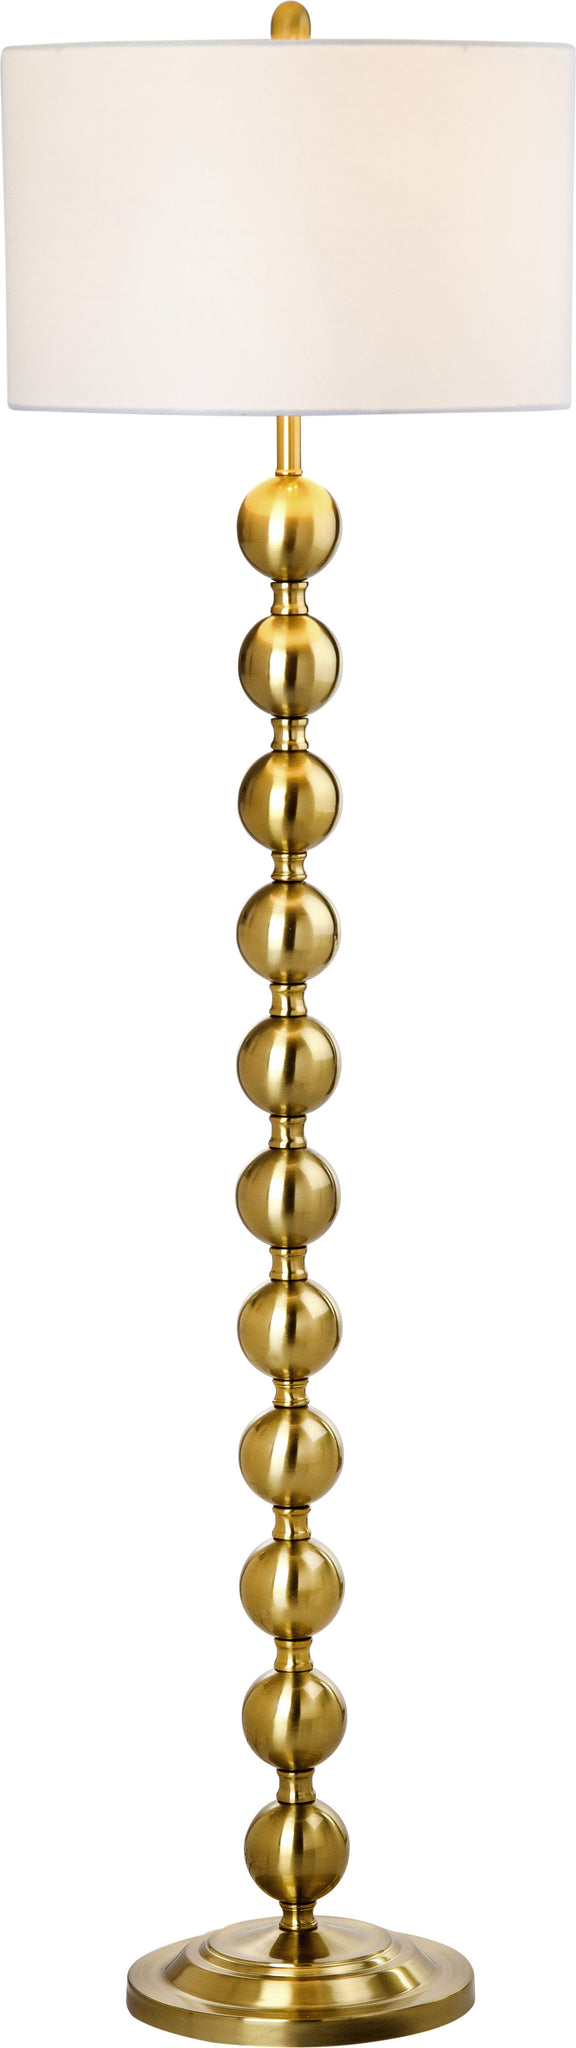 Safavieh Reflections 585-Inch H Stacked Ball Floor Lamp Brass main image